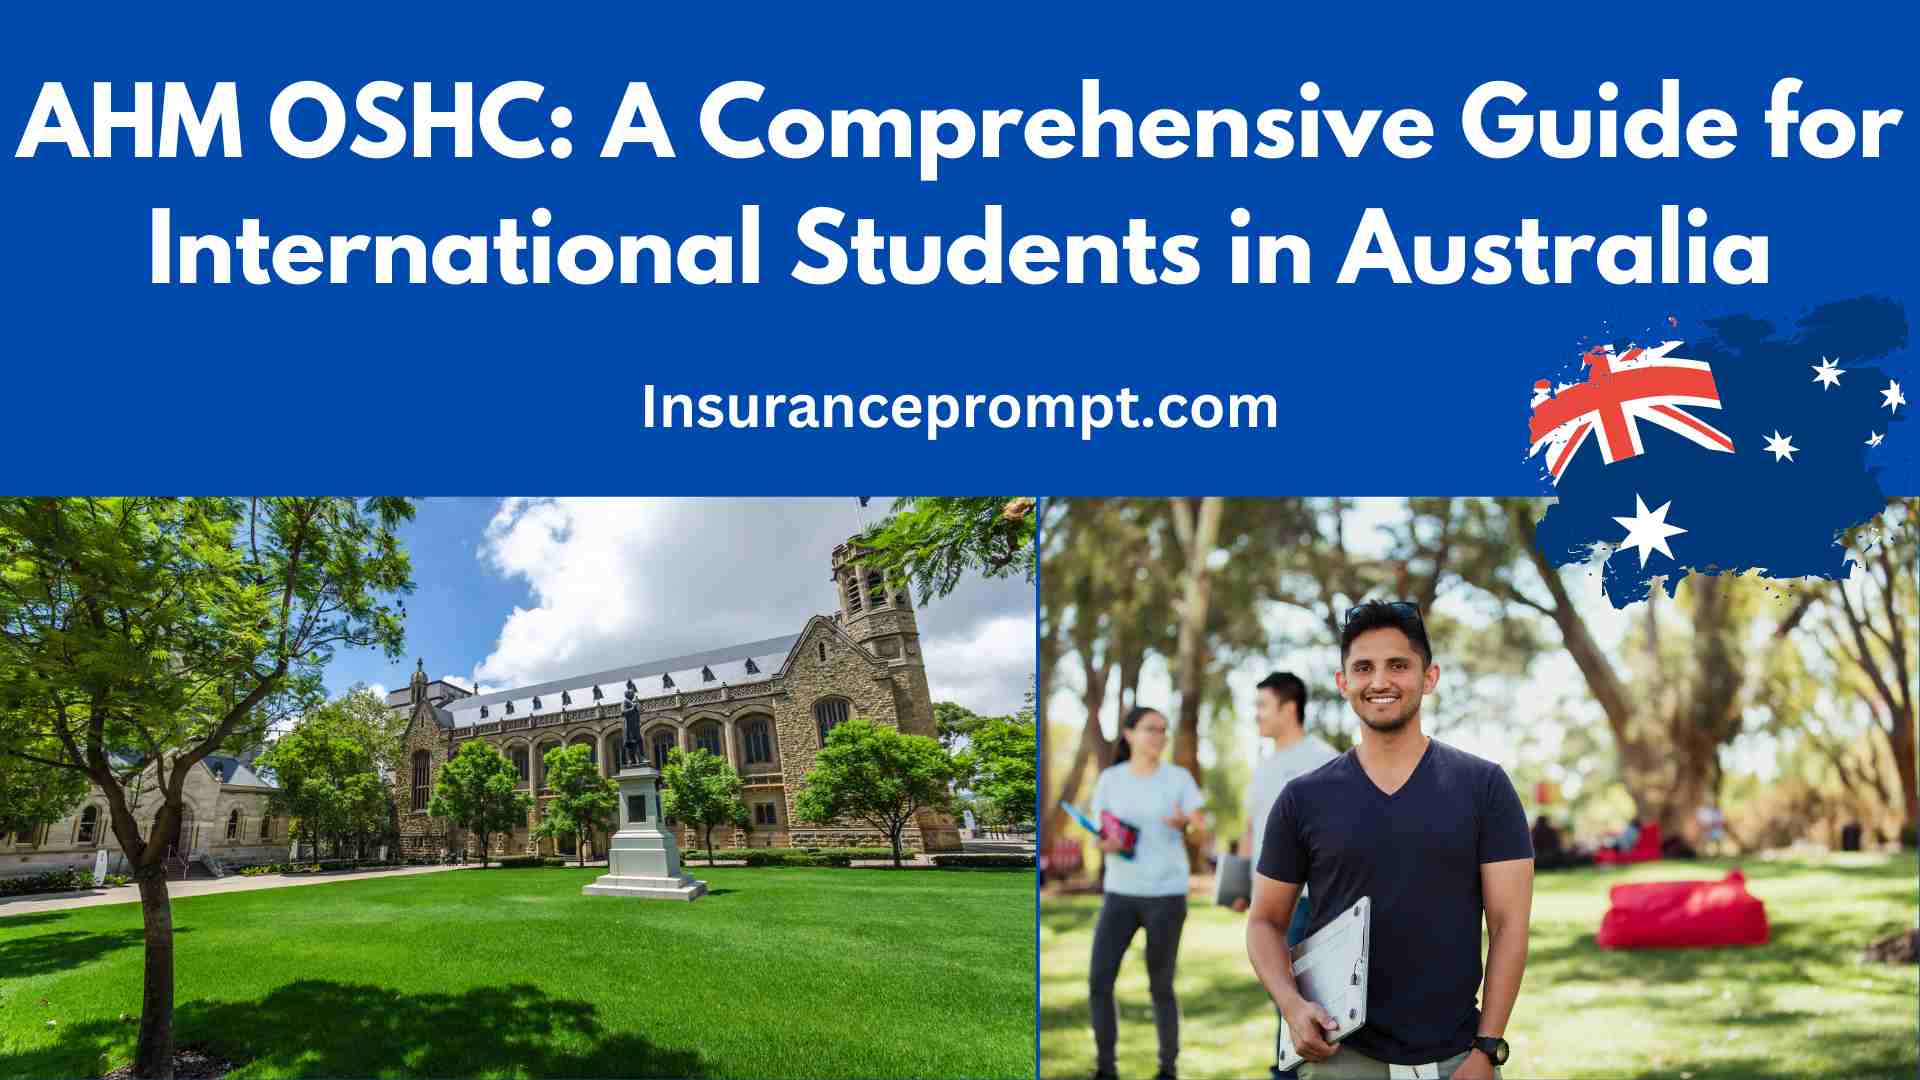 AHM OSHC: A Comprehensive Guide for International Students in Australia